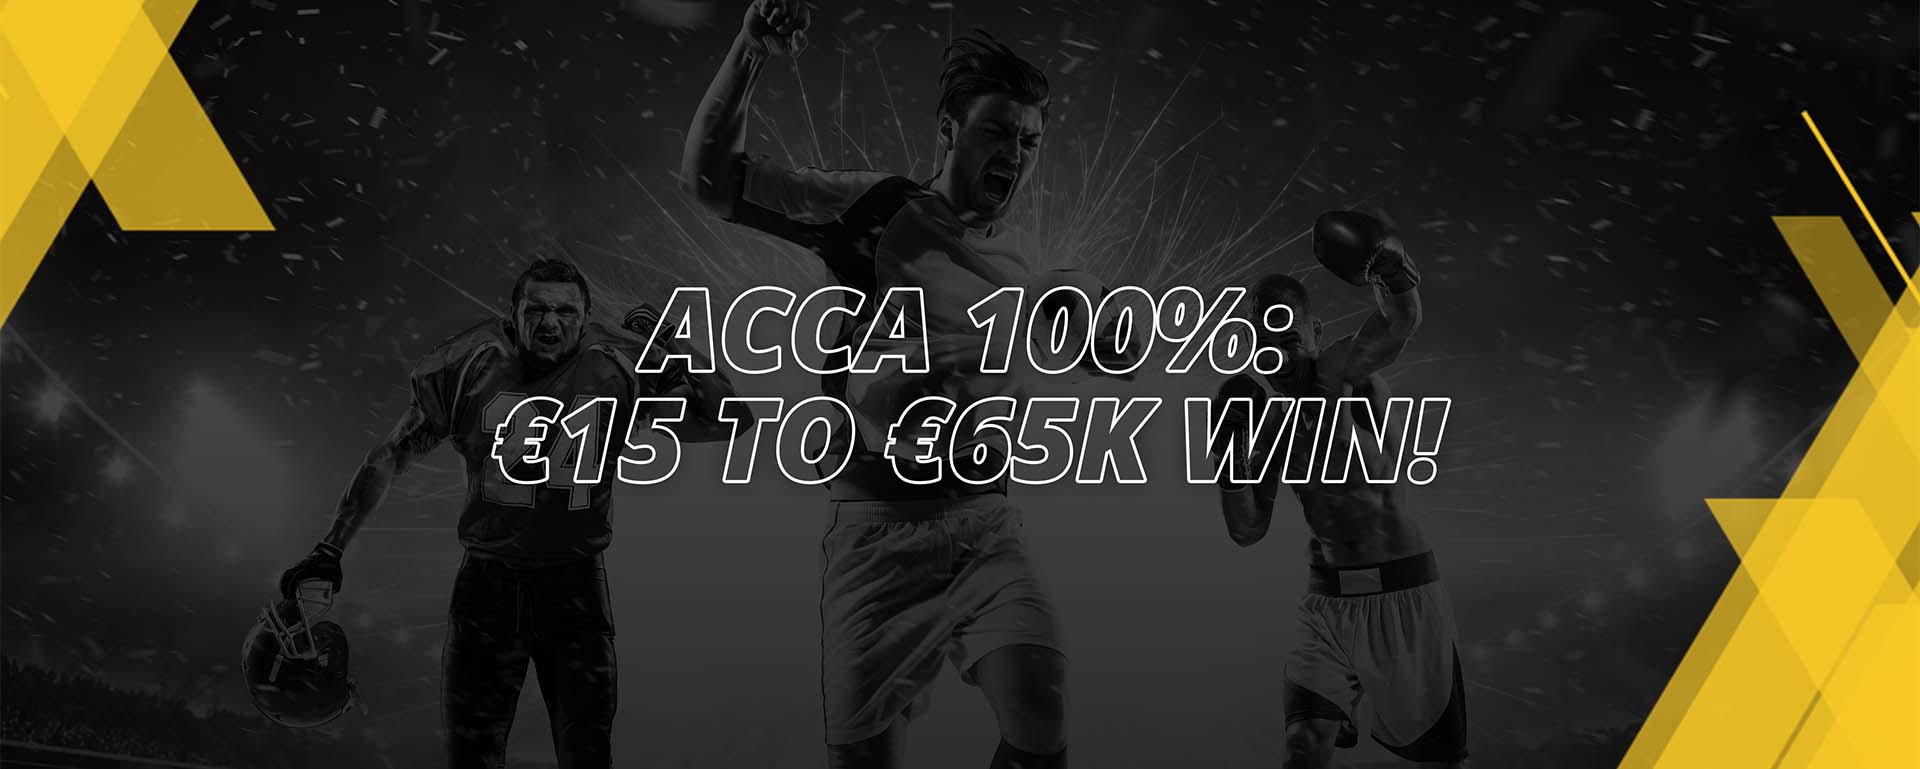 ACCA 100%: €15 TO €65K WIN!